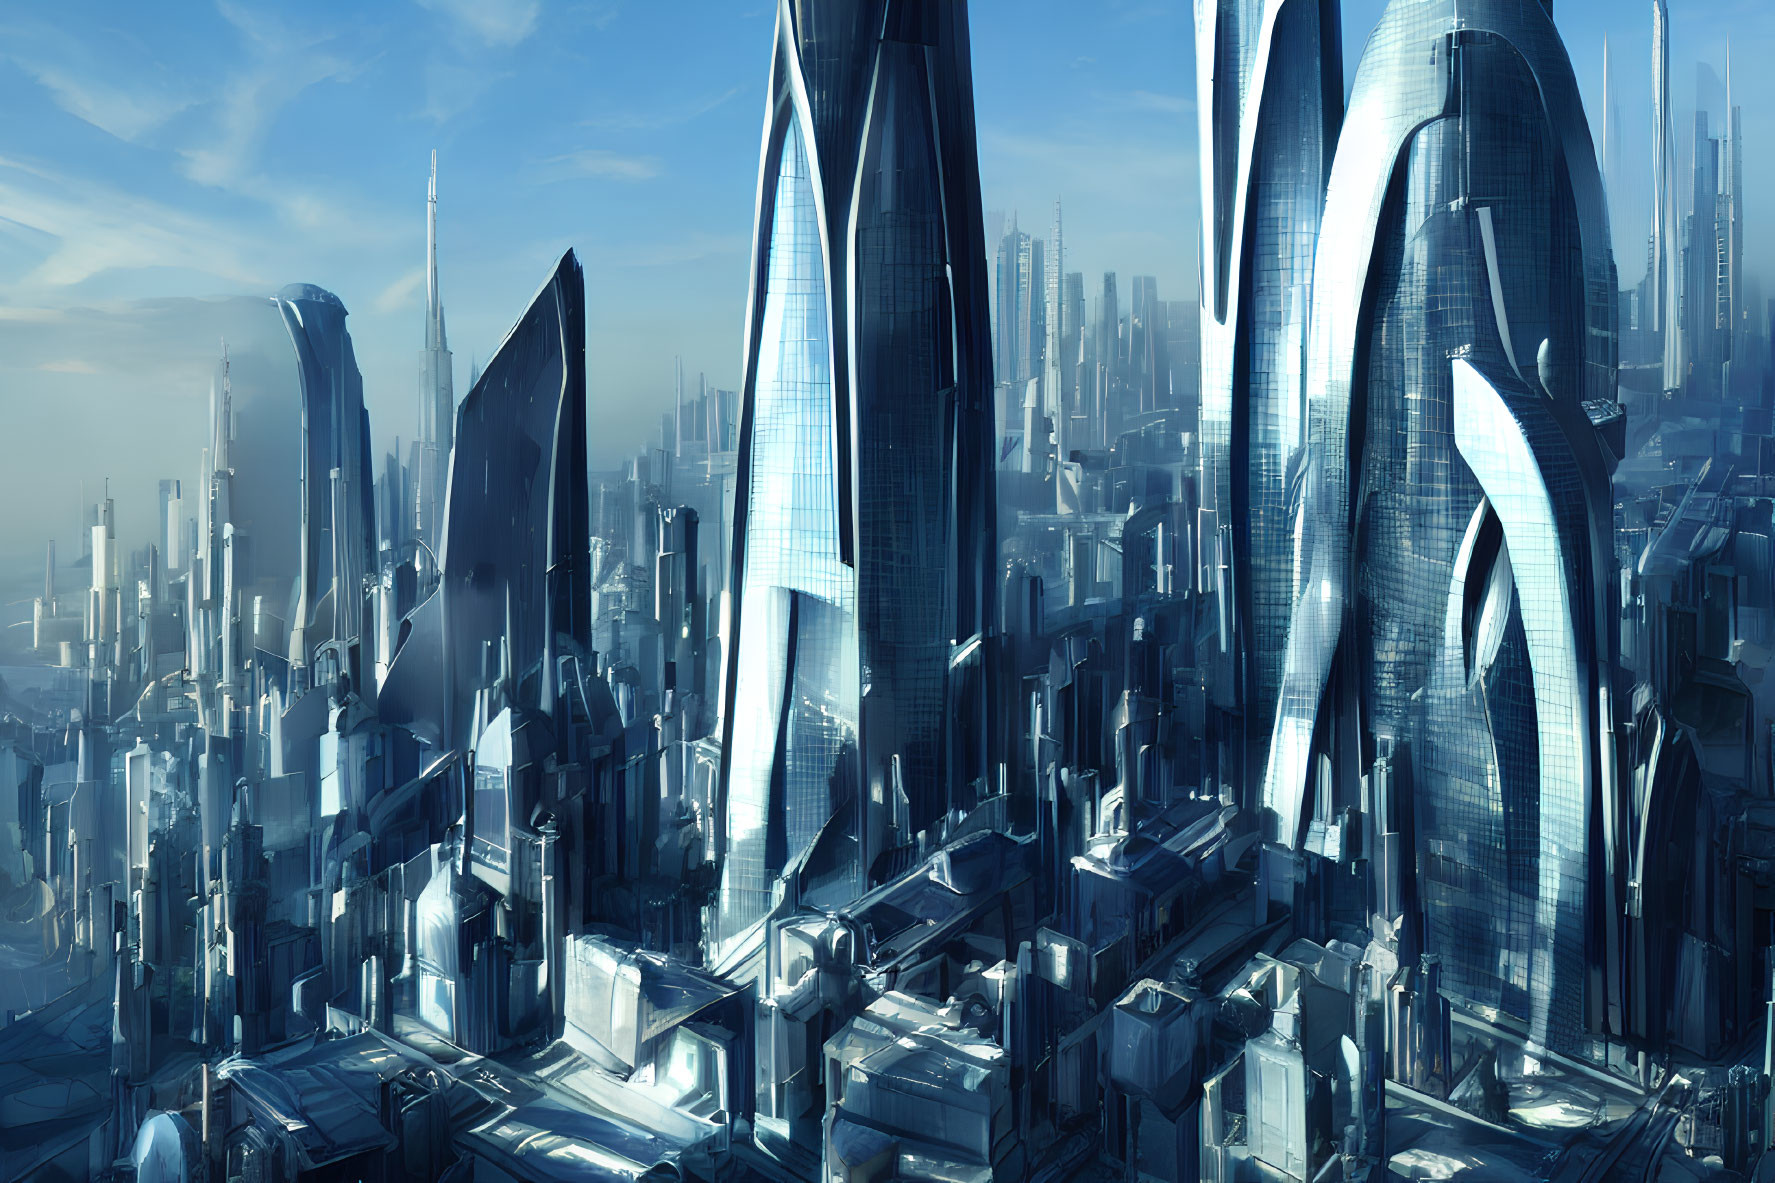 Futuristic cityscape with sleek skyscrapers in blue hue